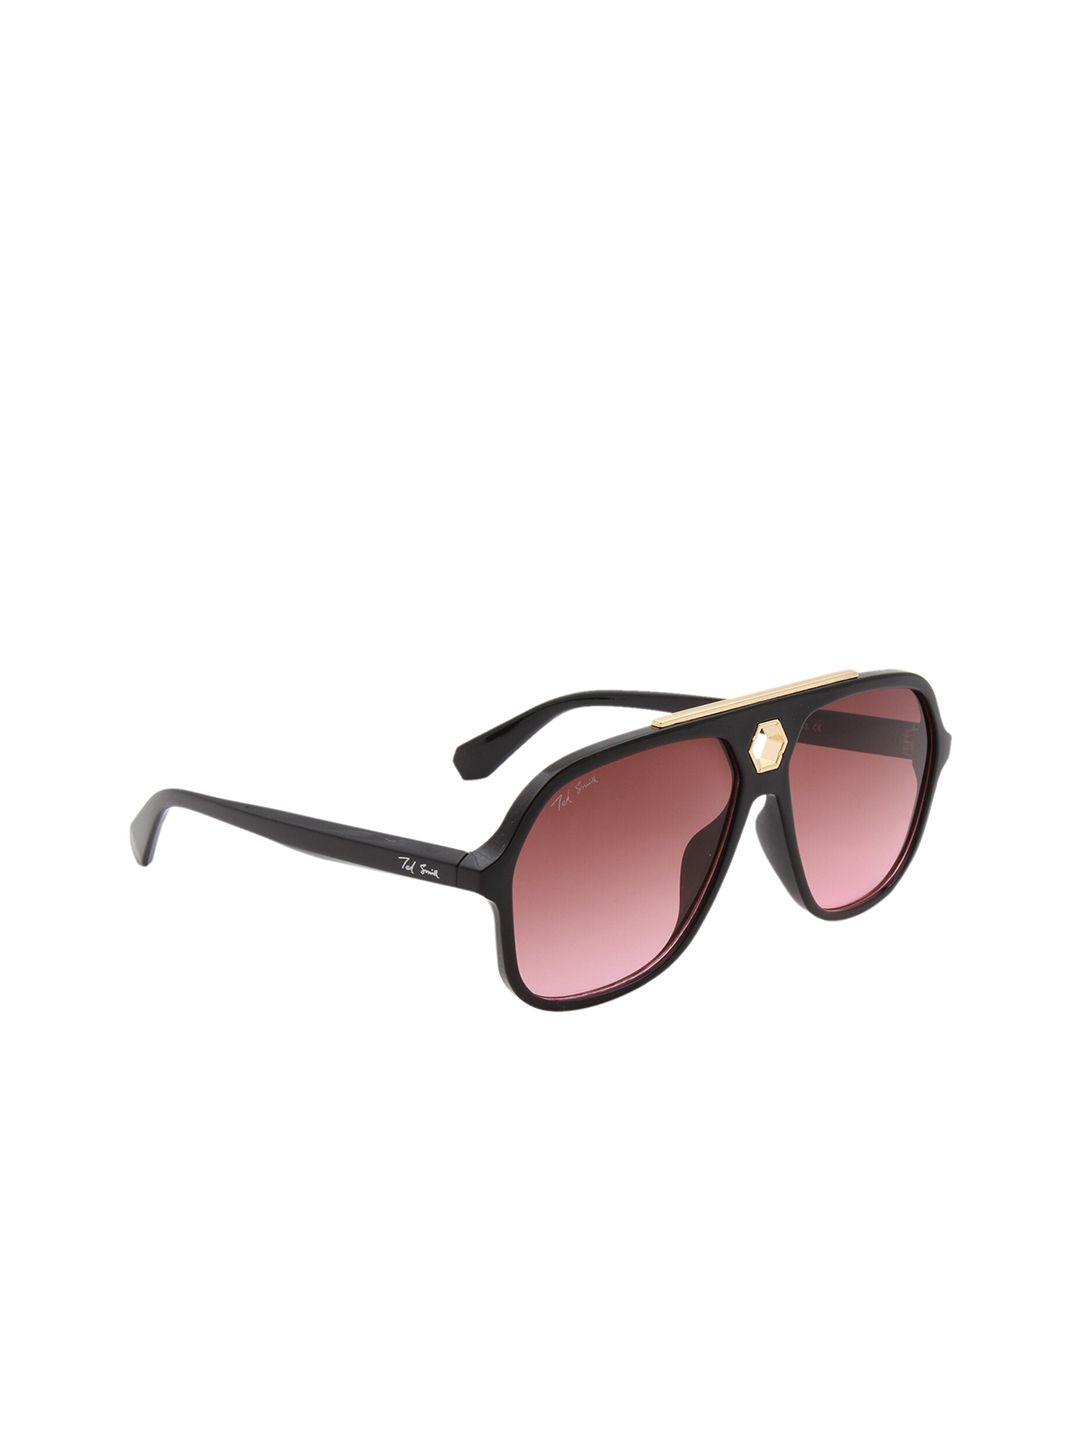 ted smith unisex pink lens & black aviator sunglasses with uv protected lens